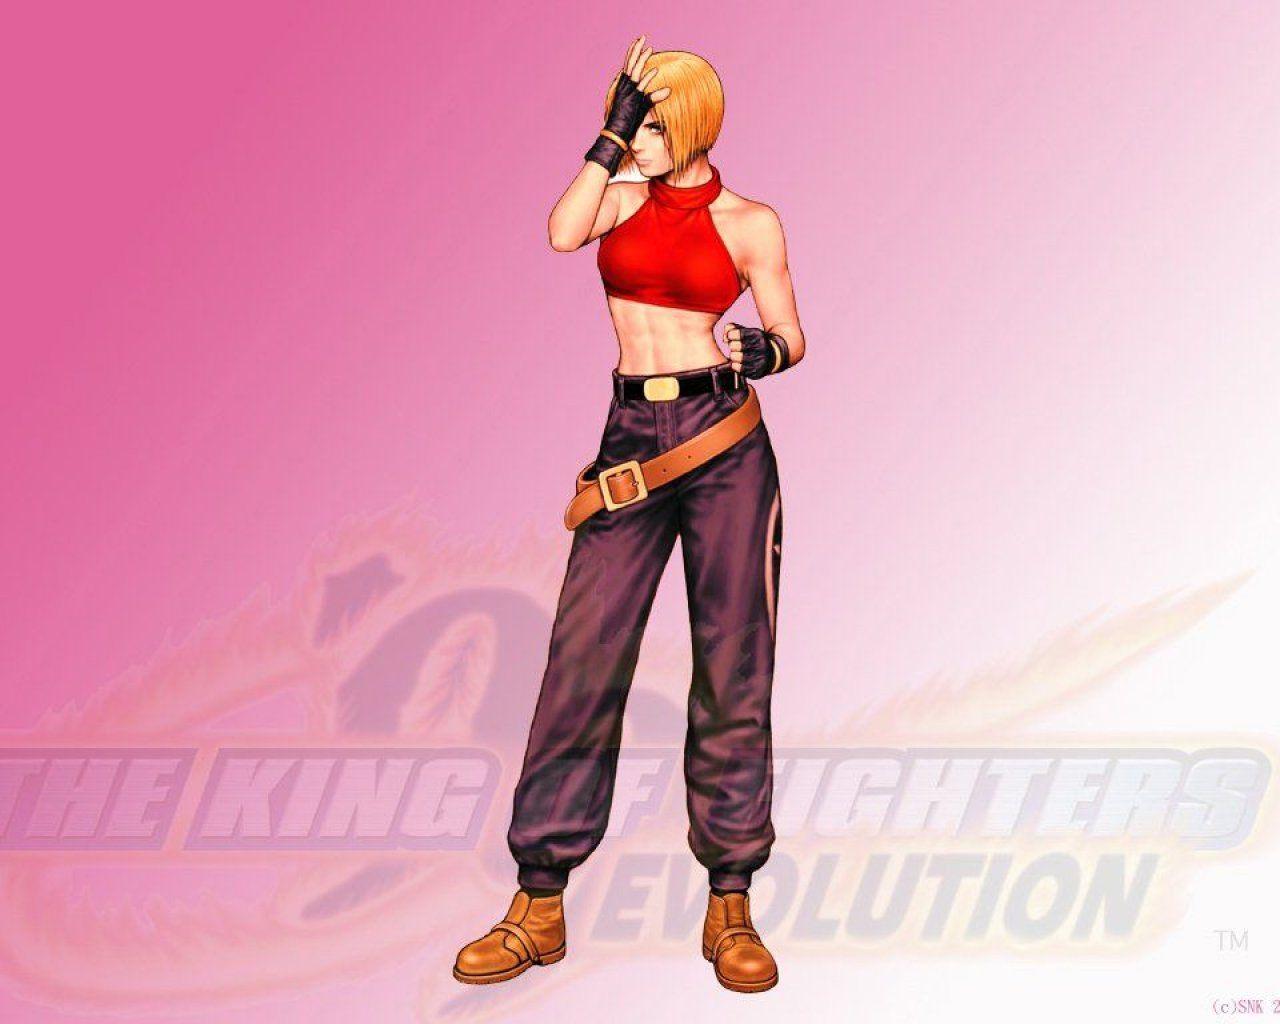 King of Fighters Wallpaper King of Fighters Wallpaper